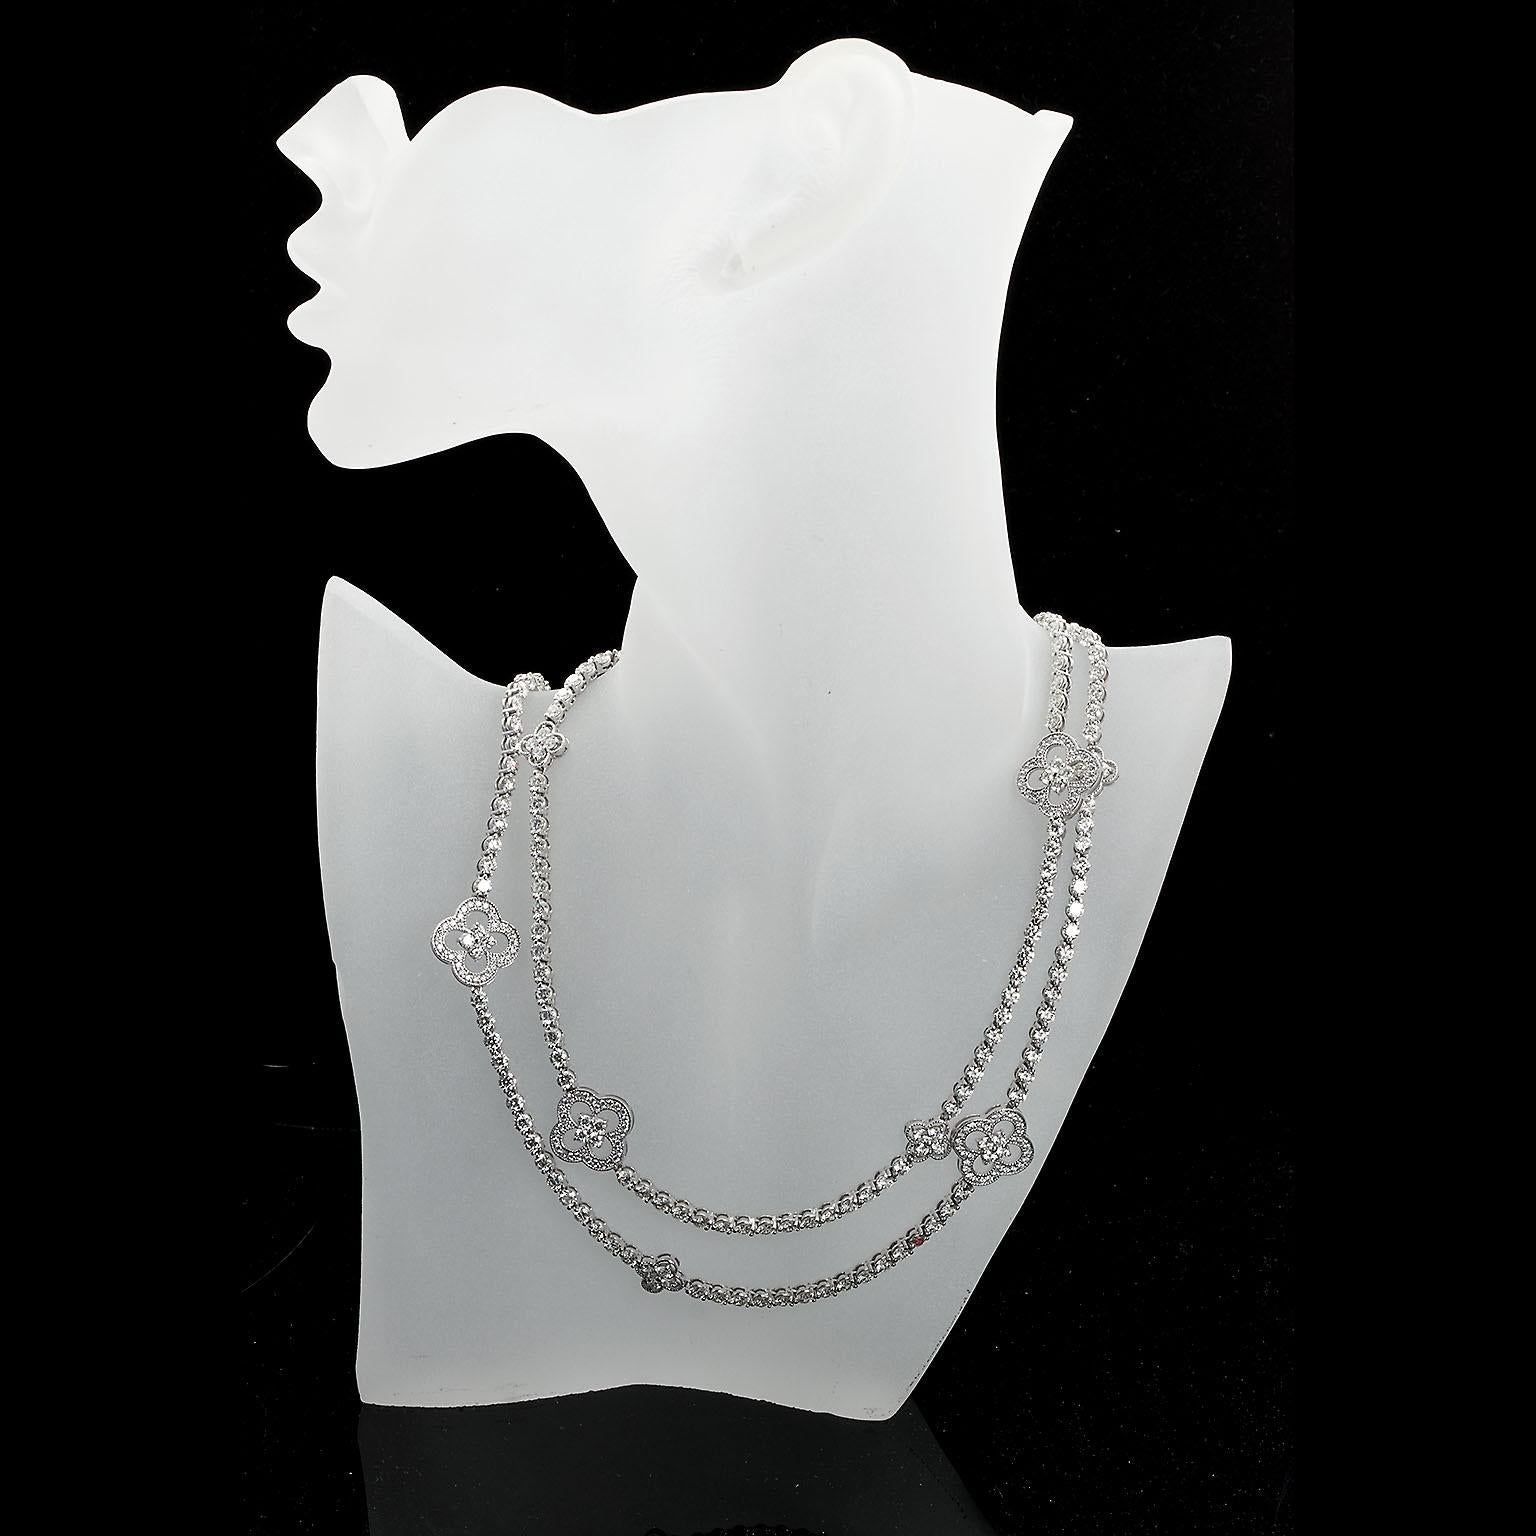 A diamond in 18k white gold opera length necklace. A remarkable necklace can be worn single opera style or double and short. Features six larger clover shaped florets (3/4 inches/ 19mm wide) and another six smaller clover shaped florets.

Set with